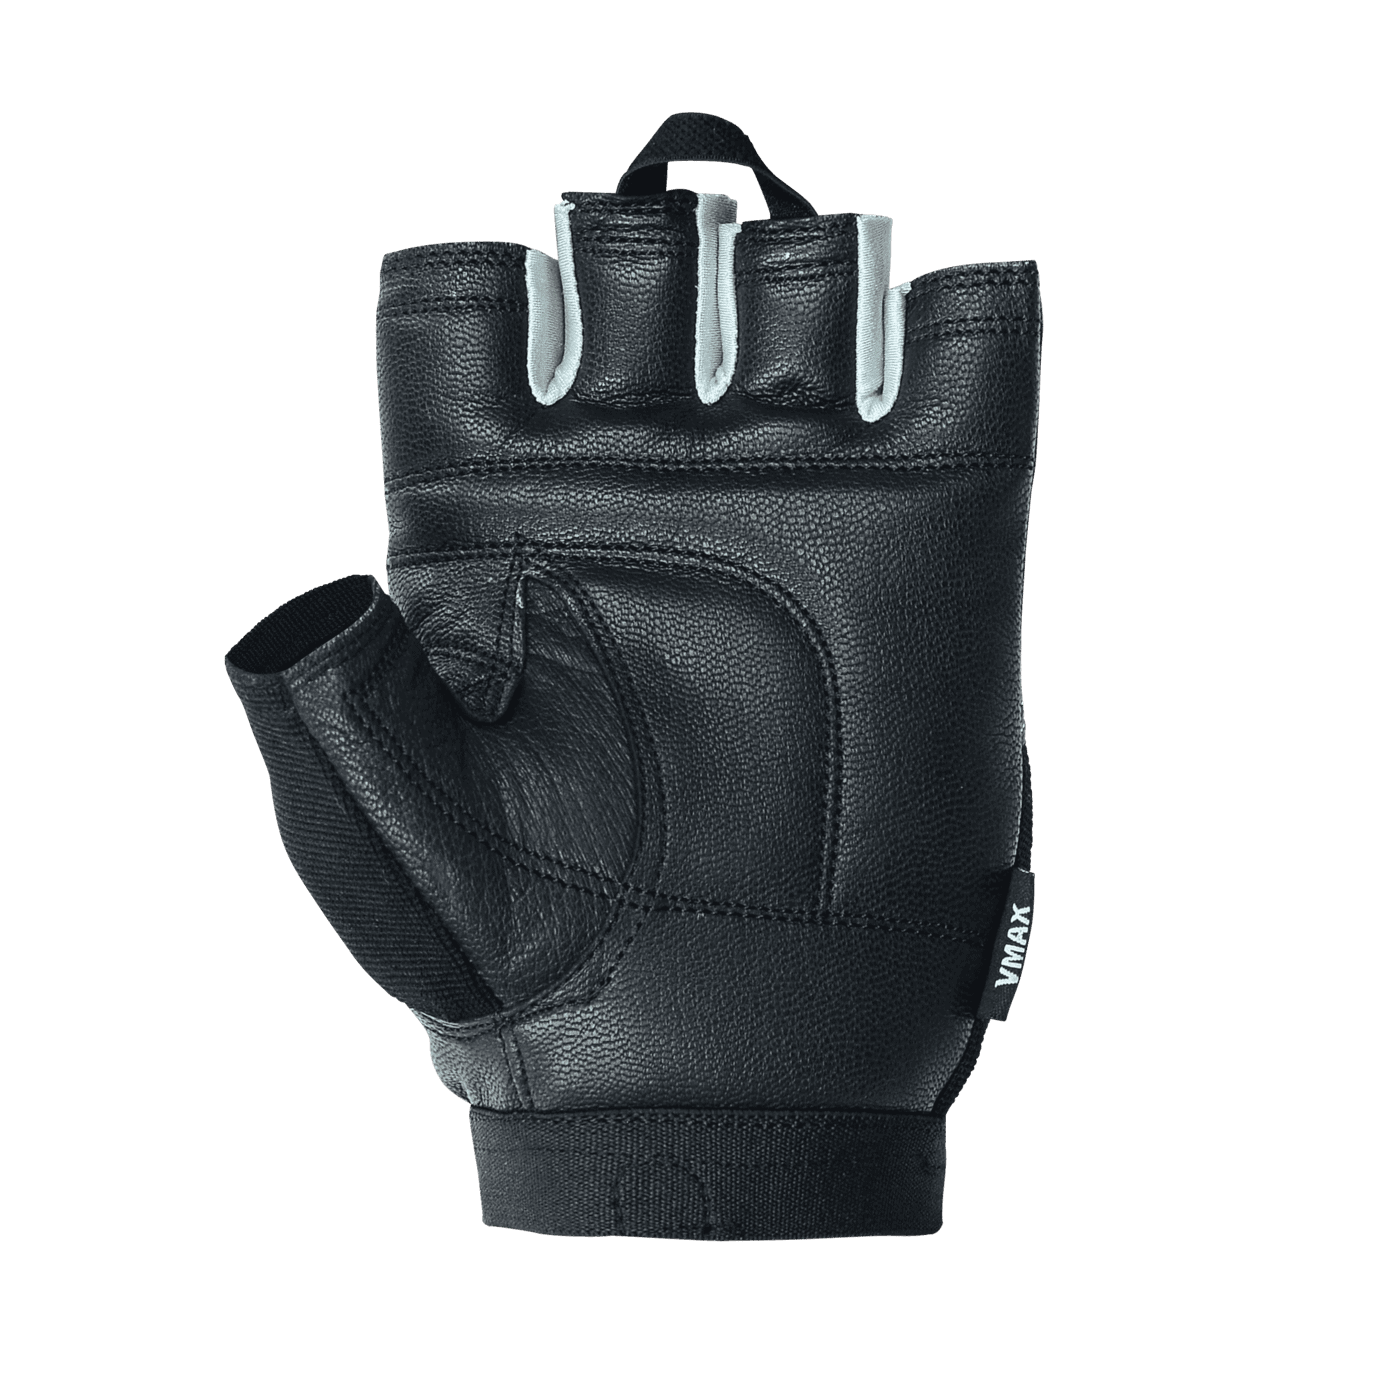 Viper Heavy Duty Leather Gloves